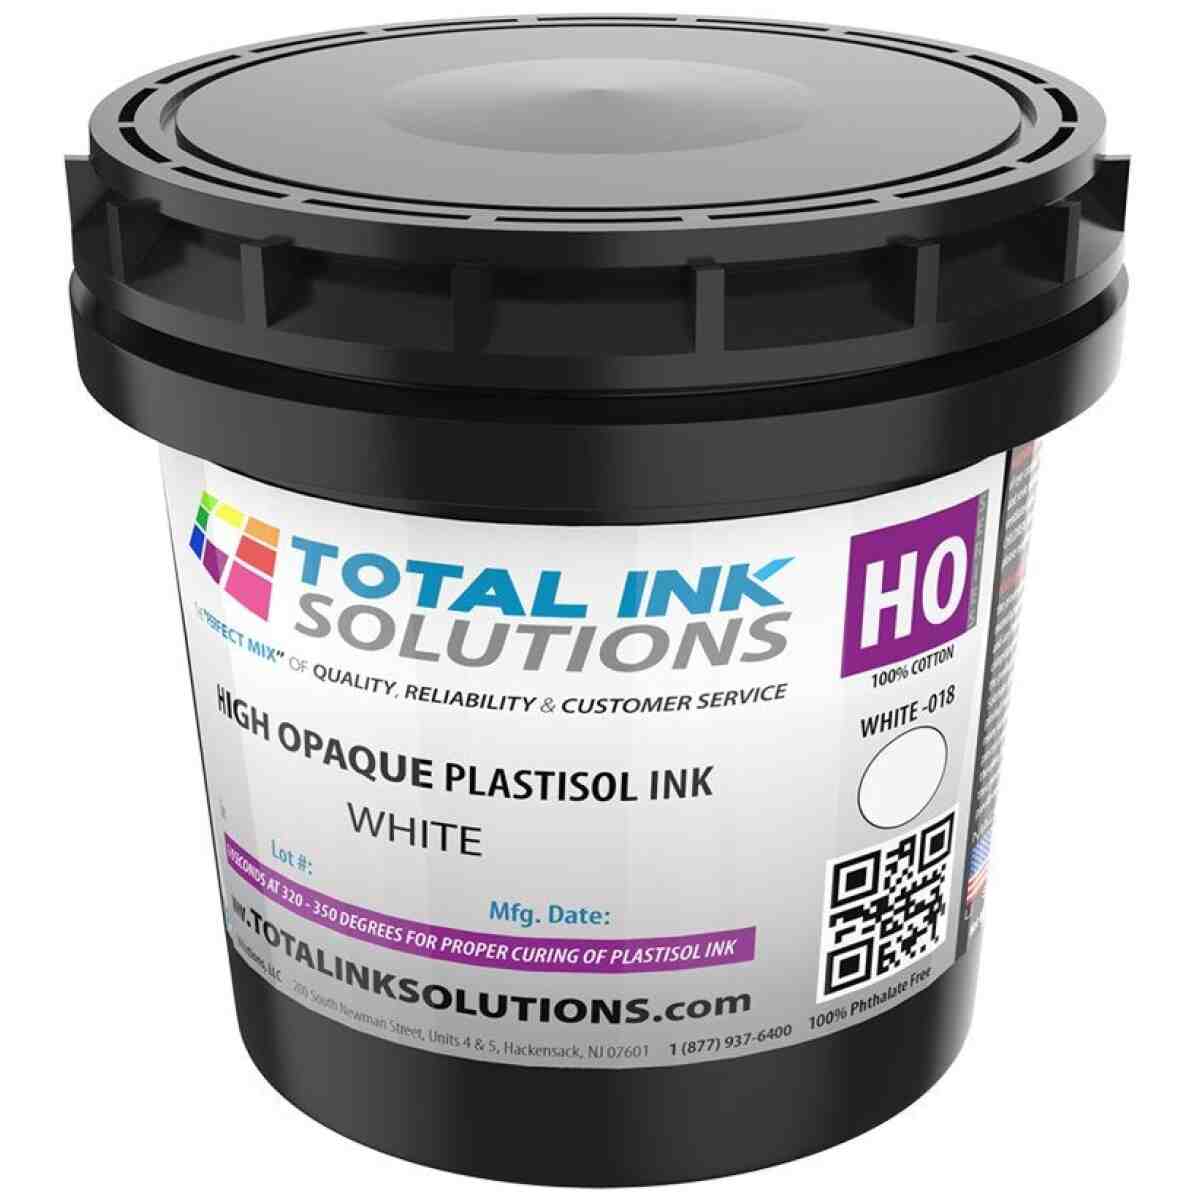 High Opaque Plastisol Ink - White - Pint TOTAL INK SOLUTIONS®